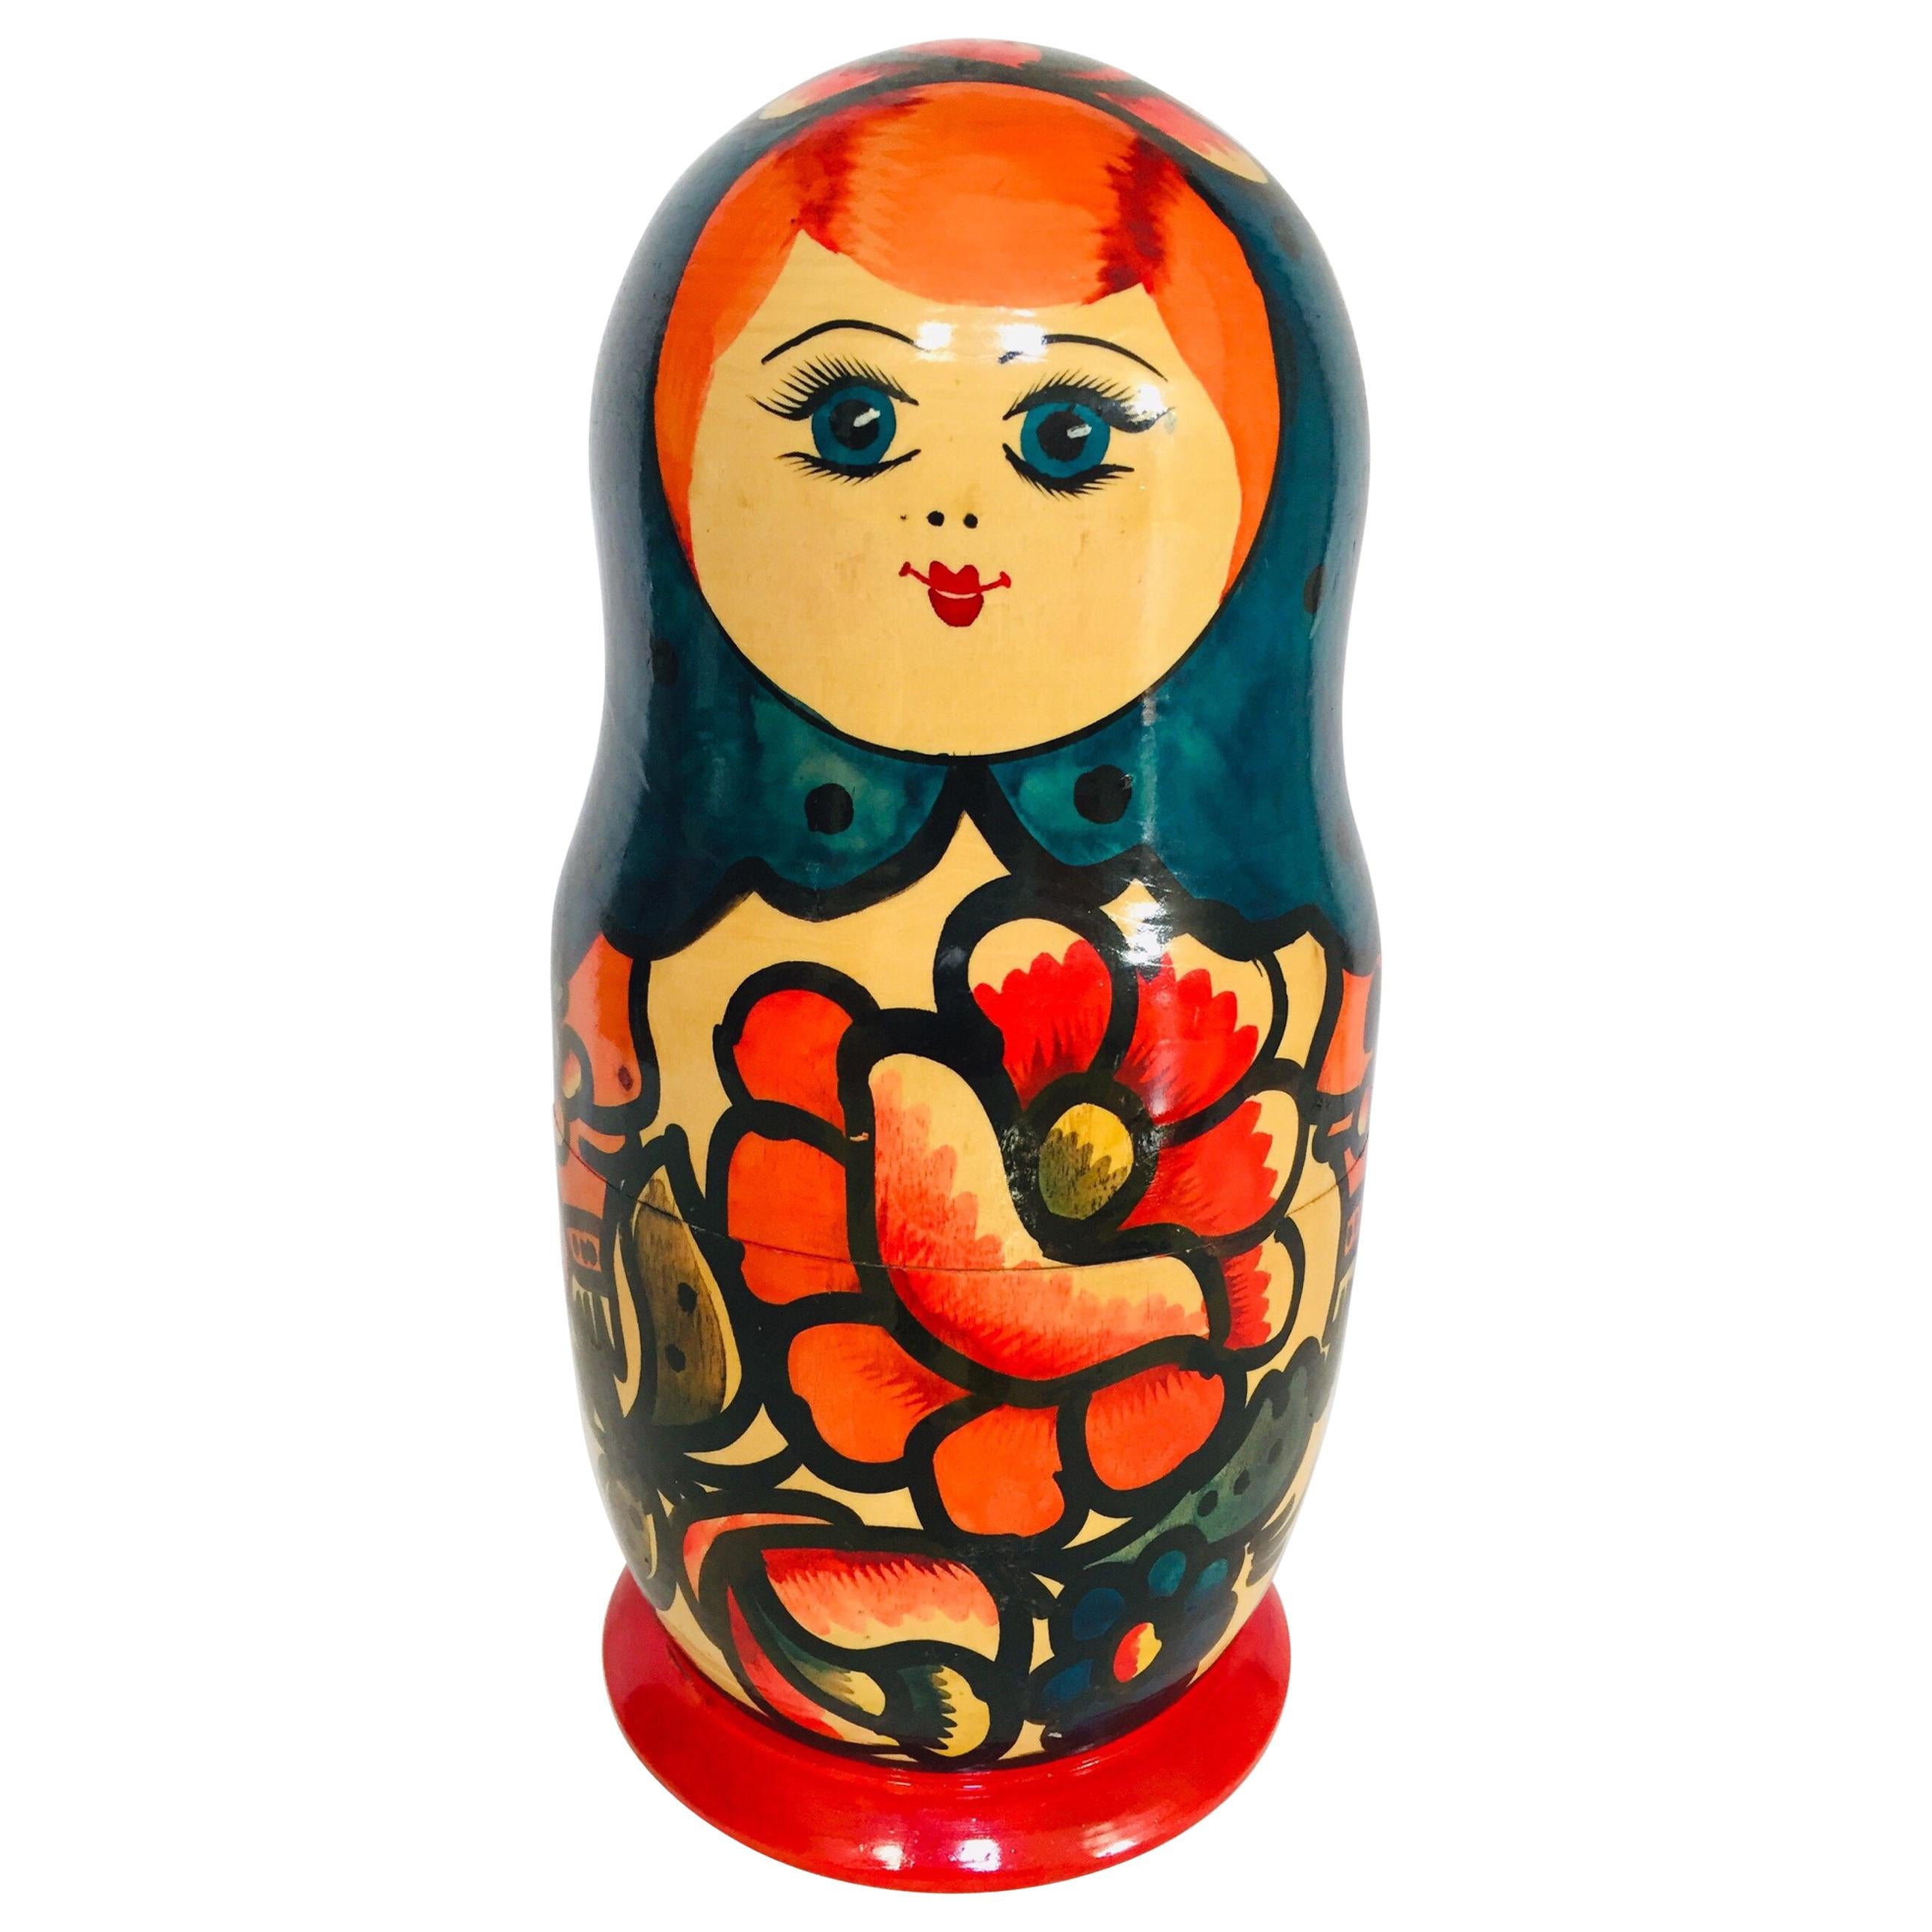 Hand Painted and Carved Nesting Matryoshka Russian Dolls